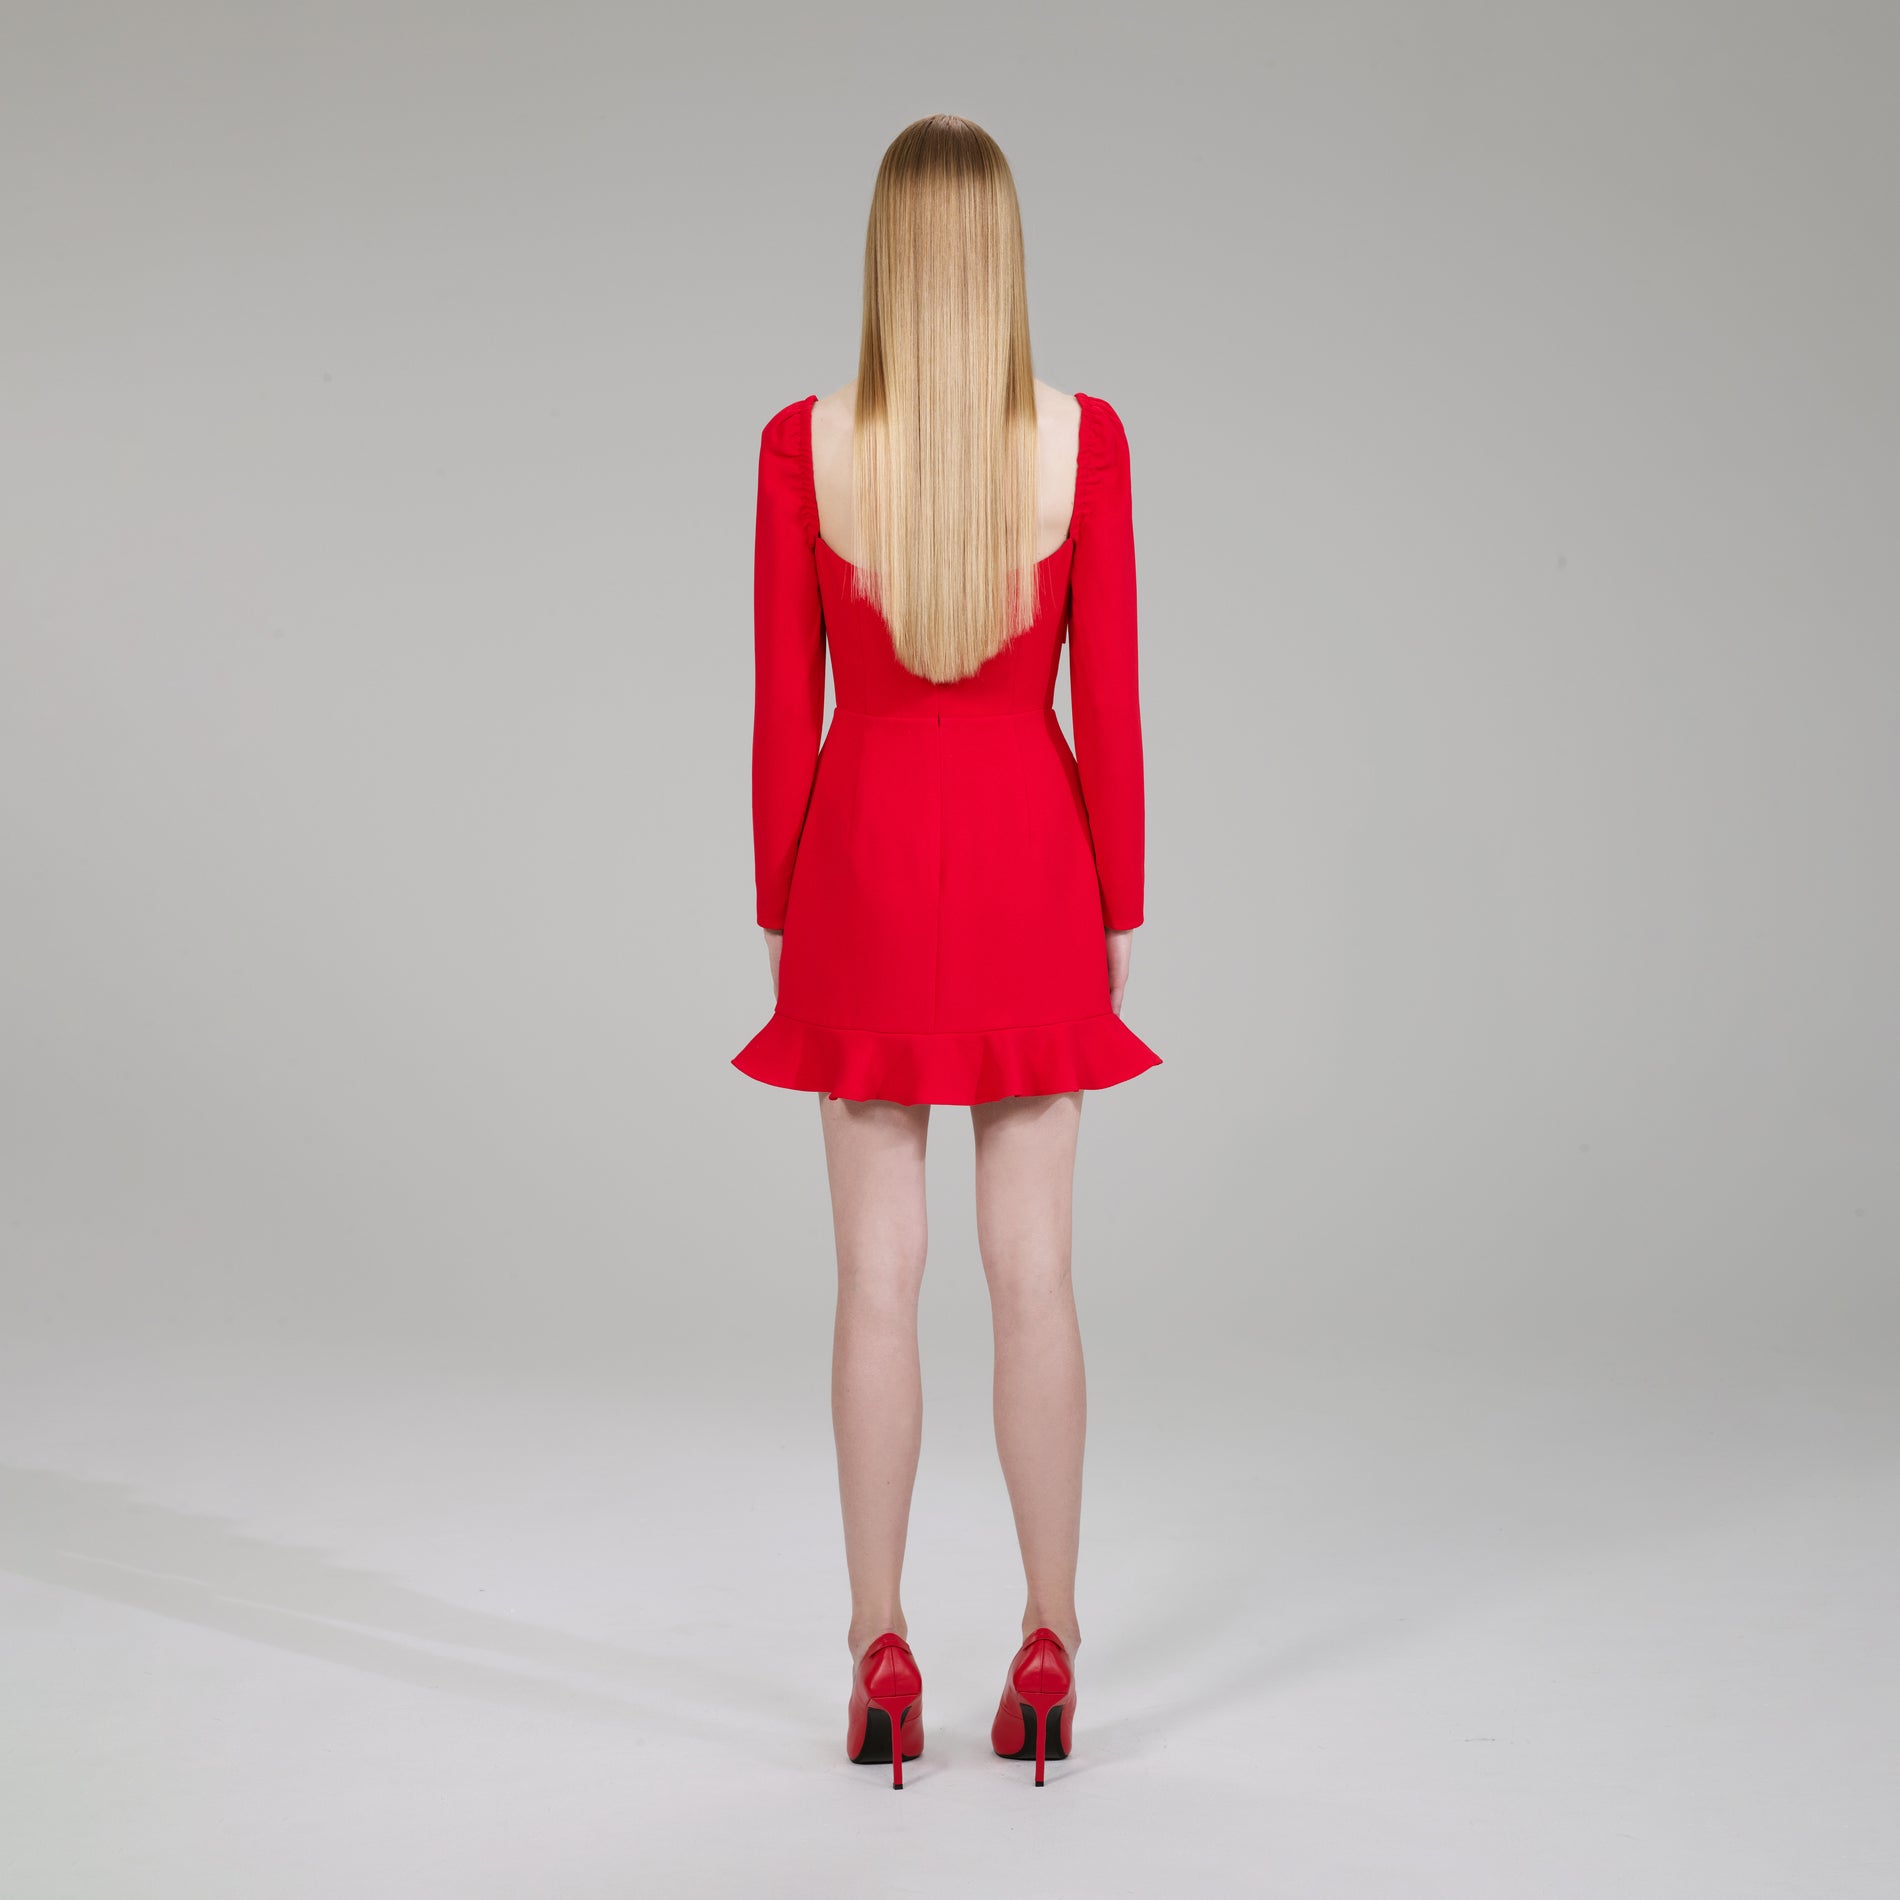 A woman wearing the Red Crepe Bow Mini Dress